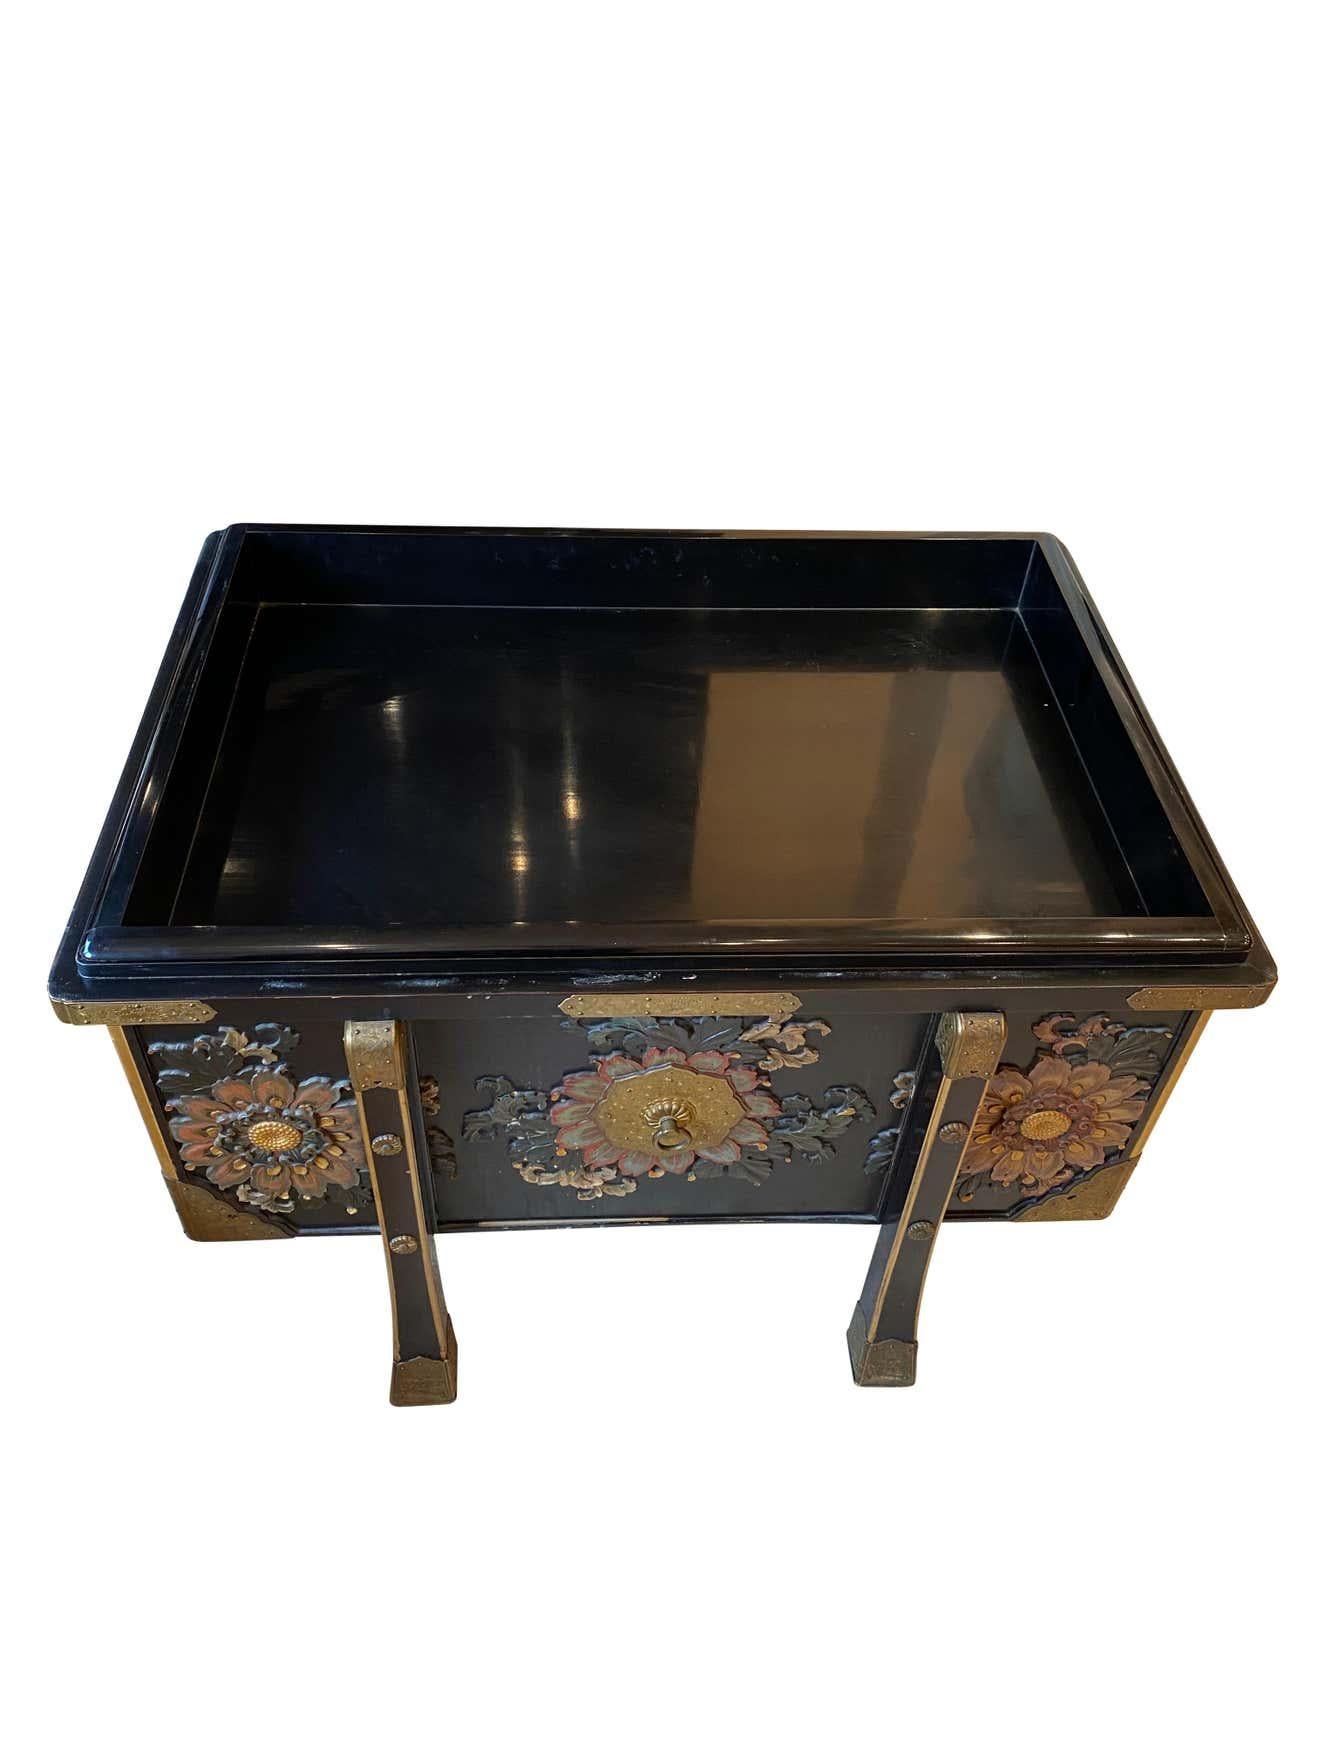 Large Japanese Black Lacquered Storage Chest, 19th Century For Sale 11